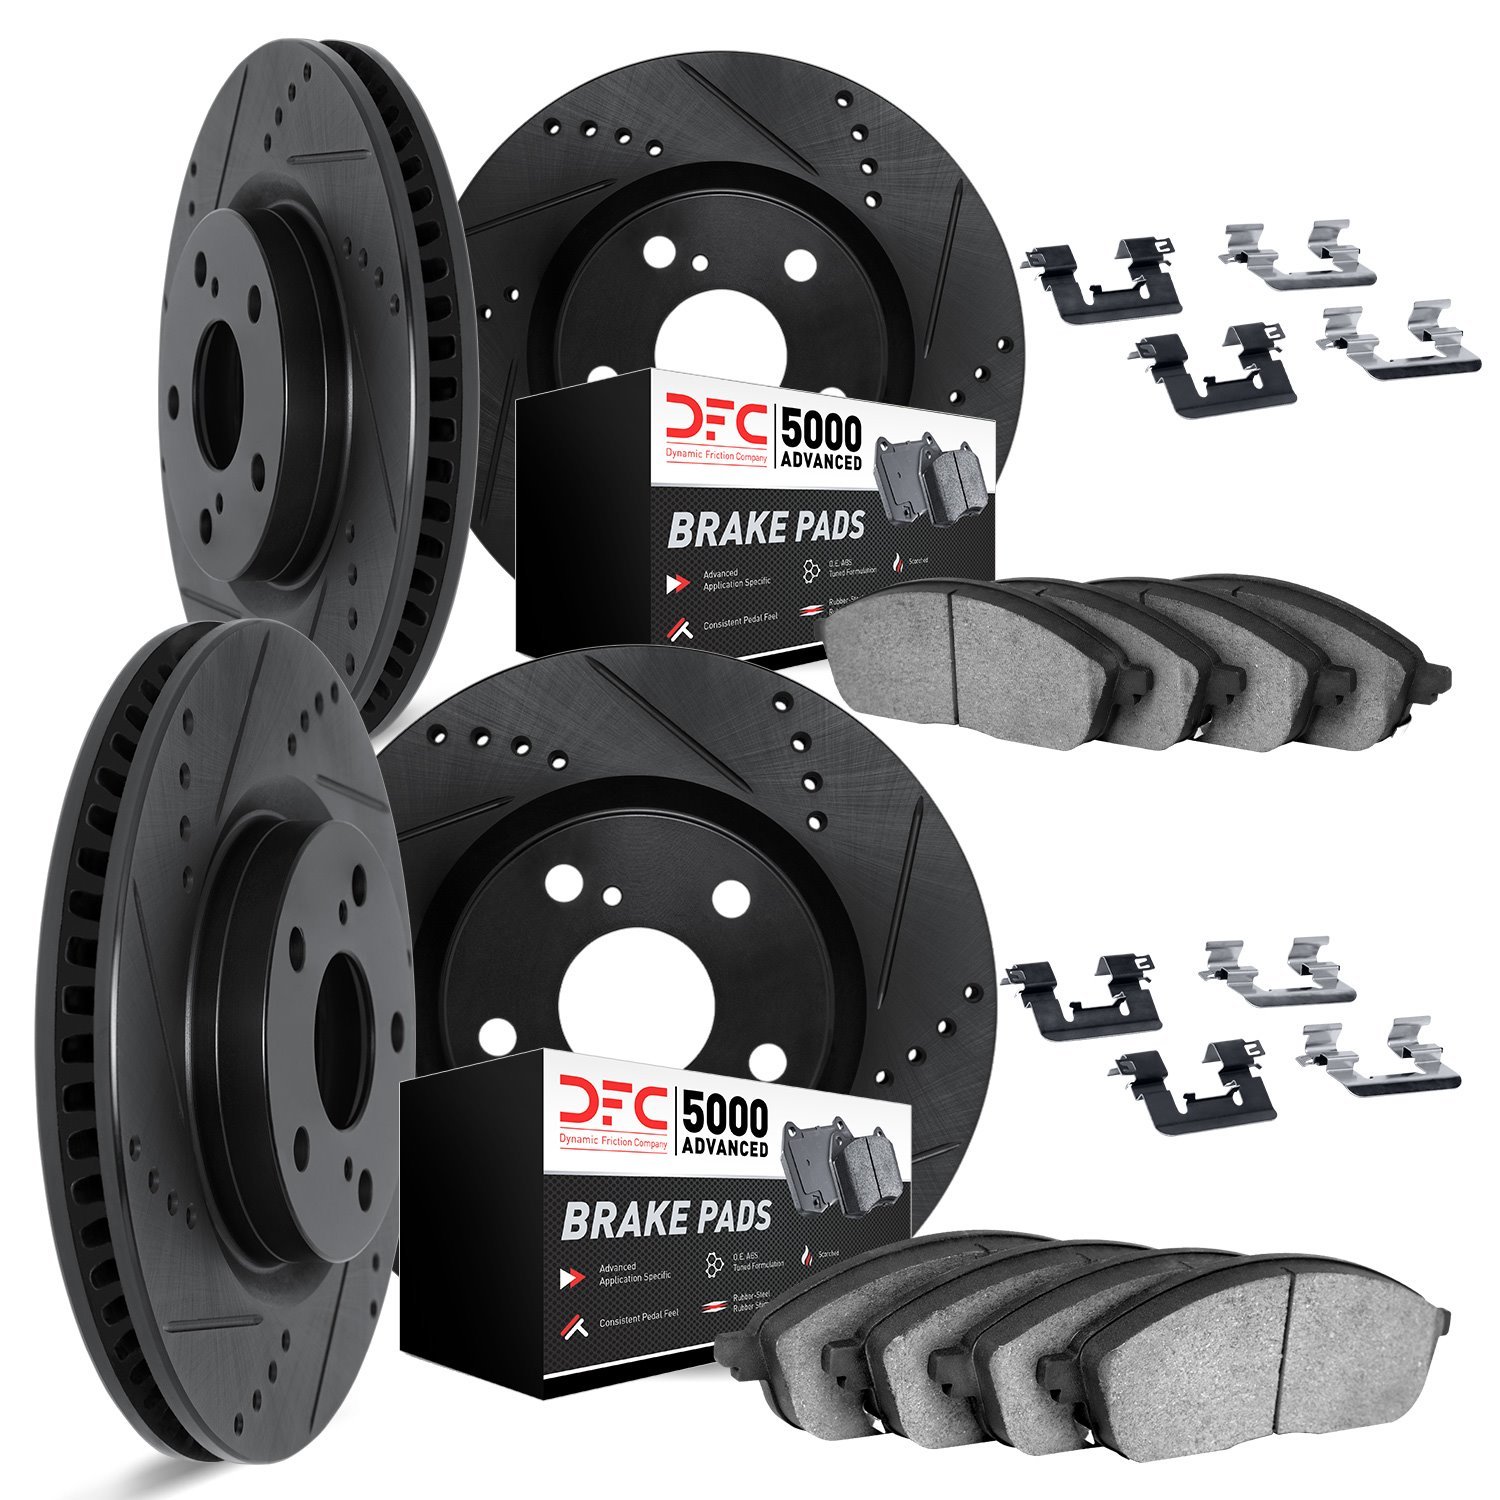 8514-31061 Drilled/Slotted Brake Rotors w/5000 Advanced Brake Pads Kit & Hardware [Black], 2011-2012 BMW, Position: Front and Re